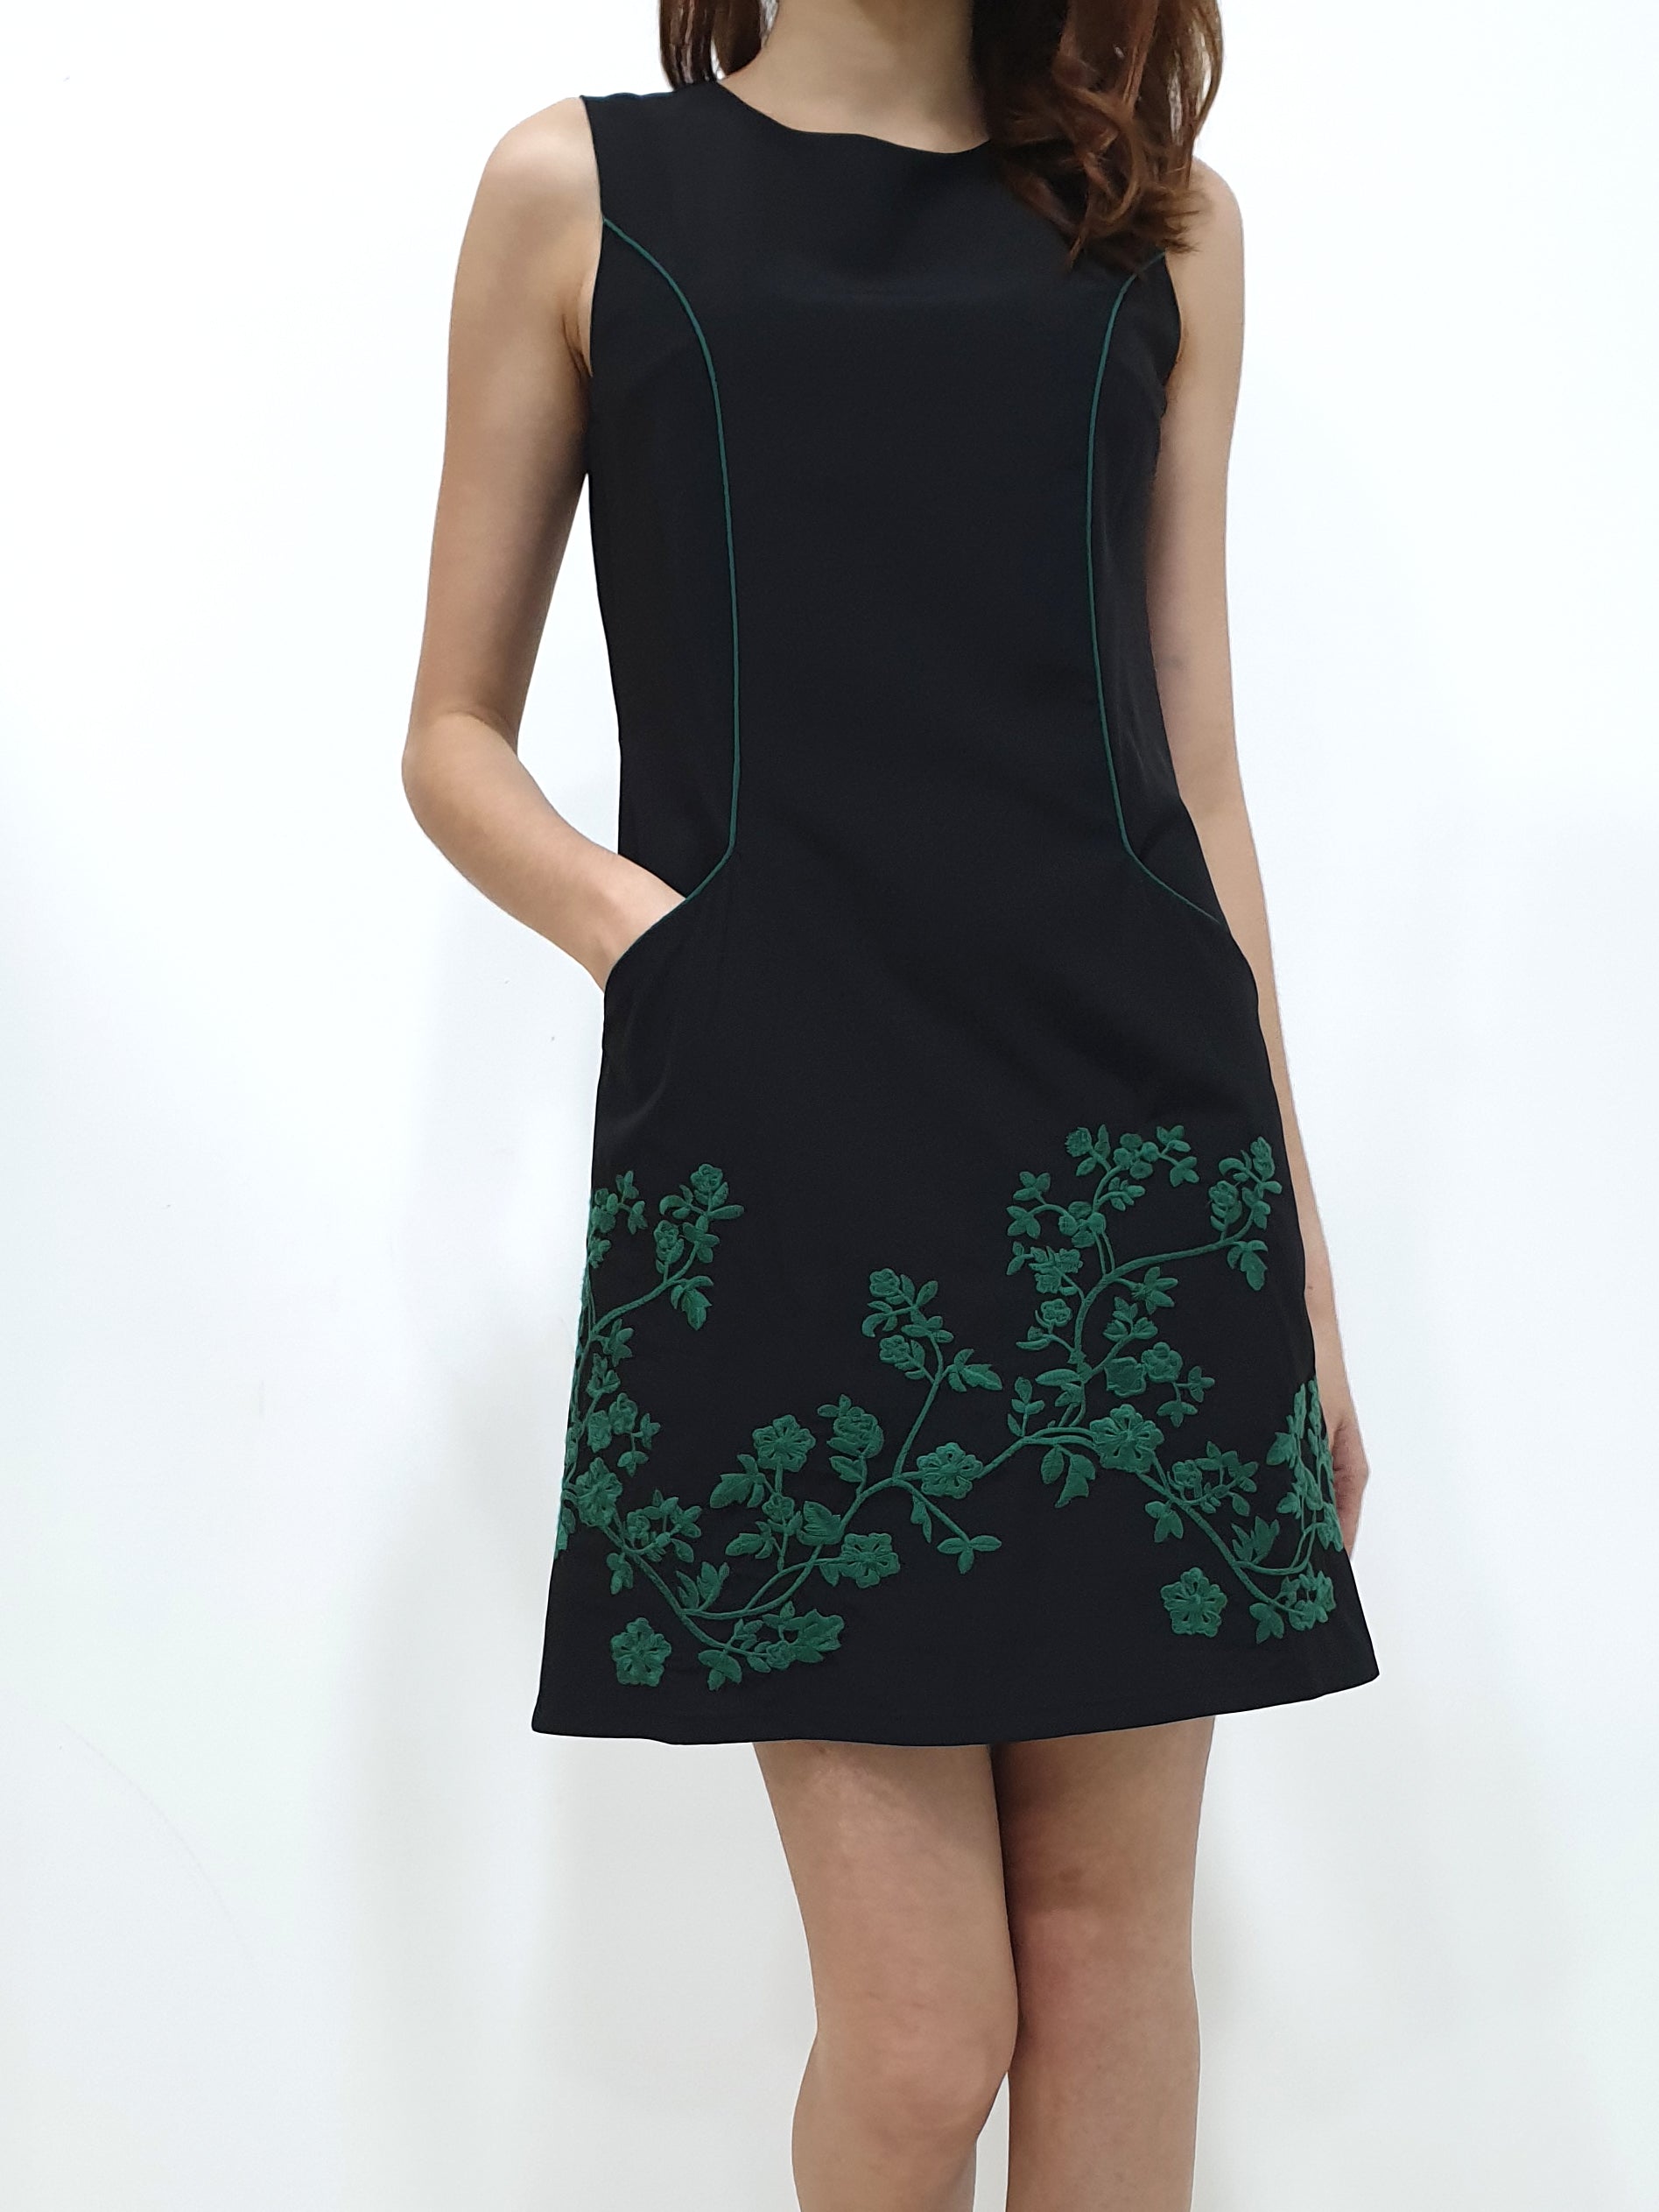 Cindy Embroidery Dress (Non-returnable) - Ferlicious